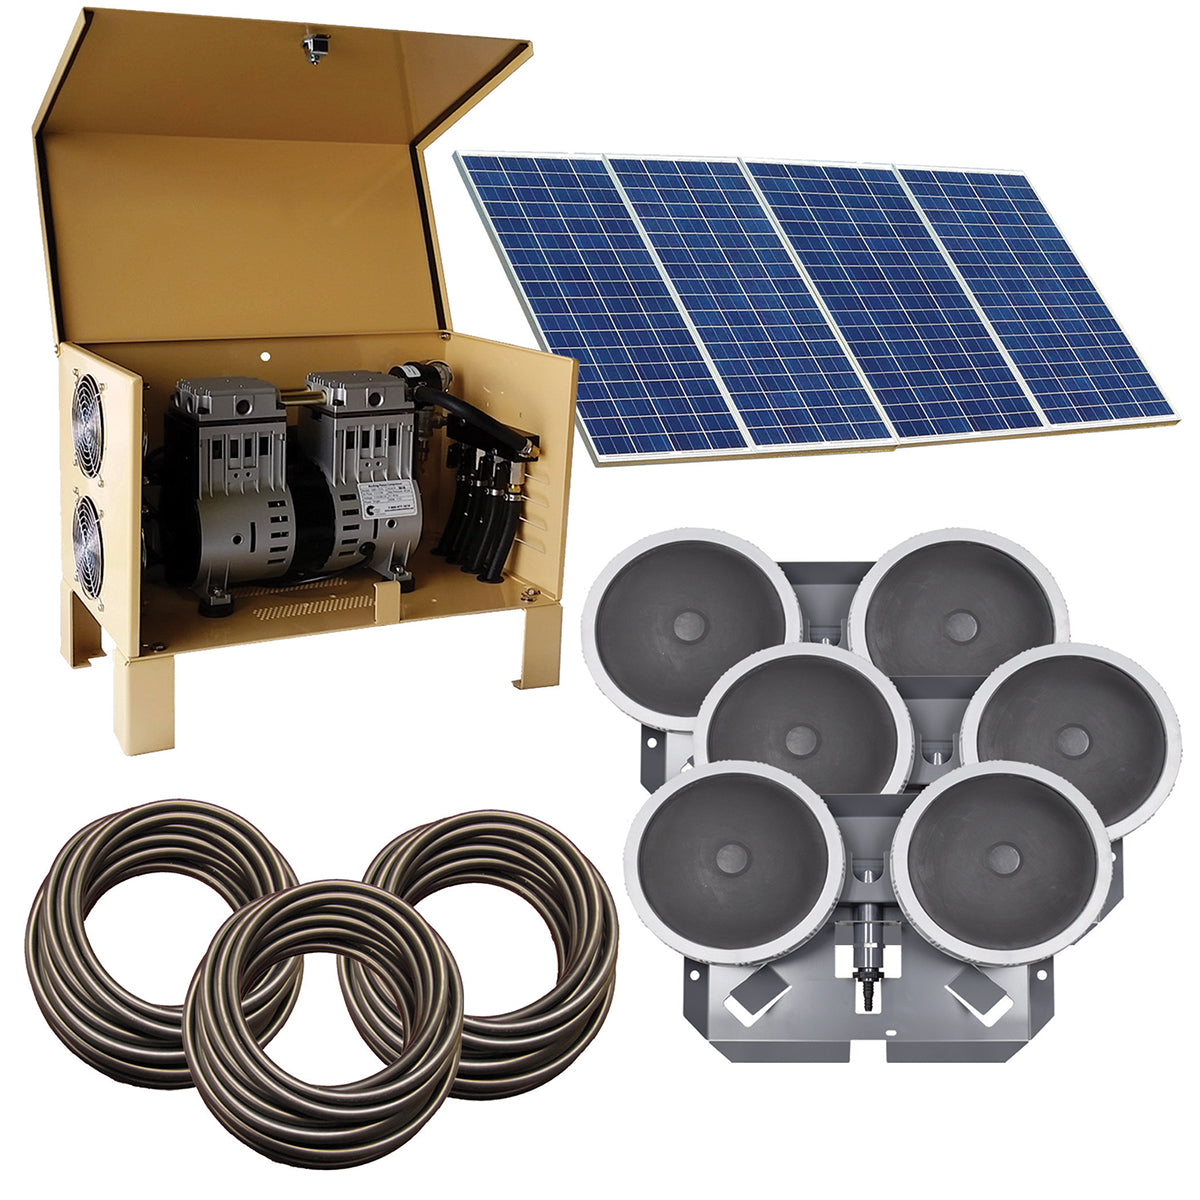 EasyPro SASD23 Deep Water Solar Aeration Complete System – Up to 2.5 acres